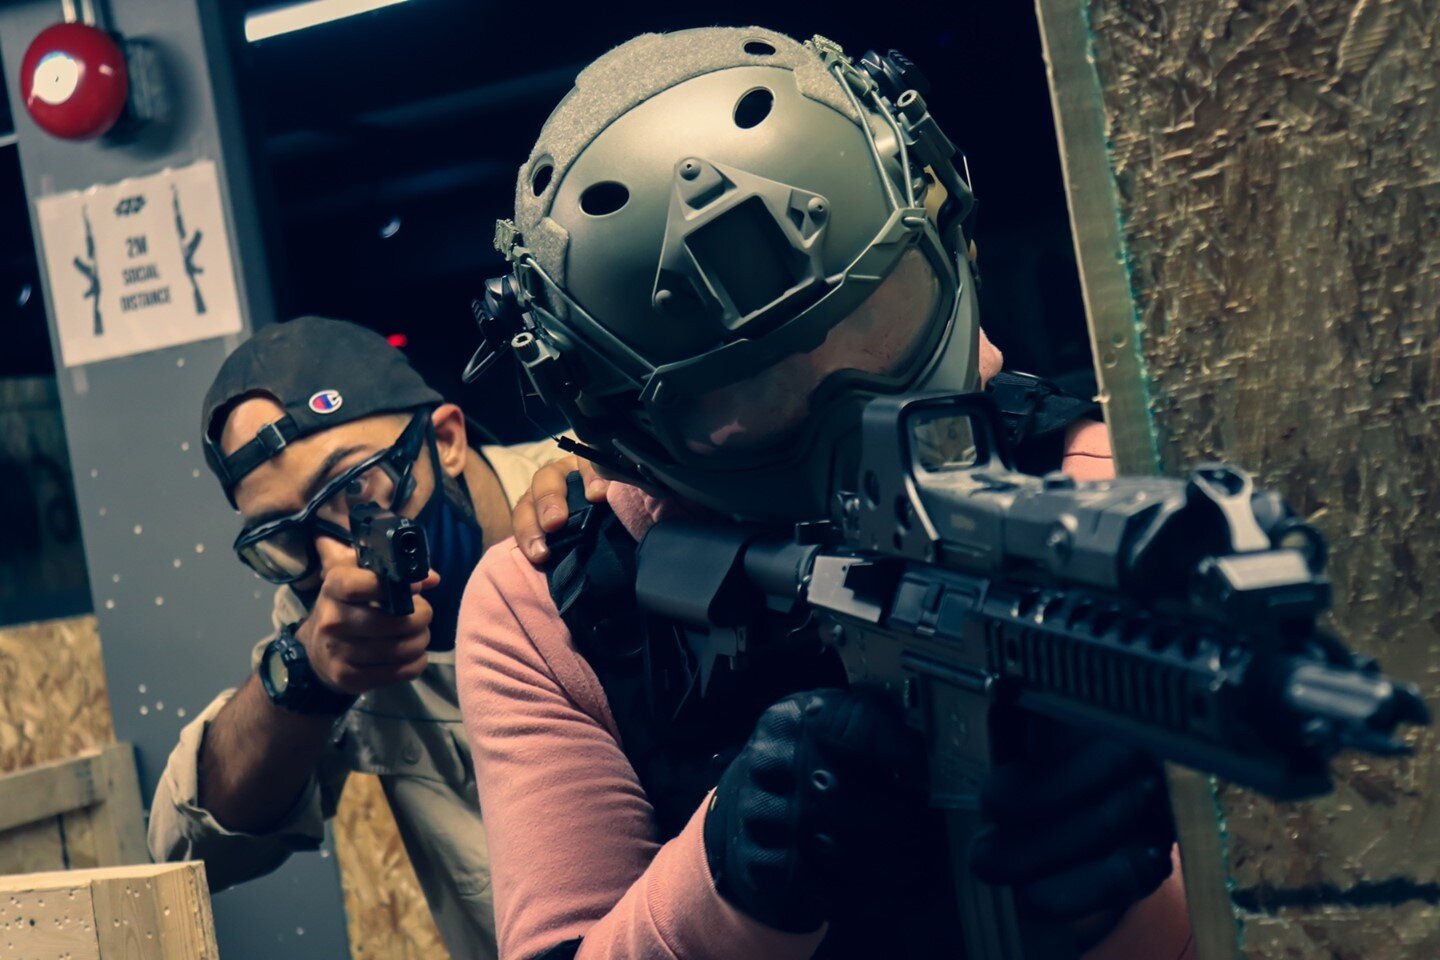 Have what it takes to fight in our CQB Arena? Bring your Kit and show us what you're made of! Don't have kit? Rent from us! We'll provide you the Rifle, mask and BBs with our rental packages. You'll have to bring the 'tacticool' though... ⁣⁠
⁣⁠
🔔 CQ